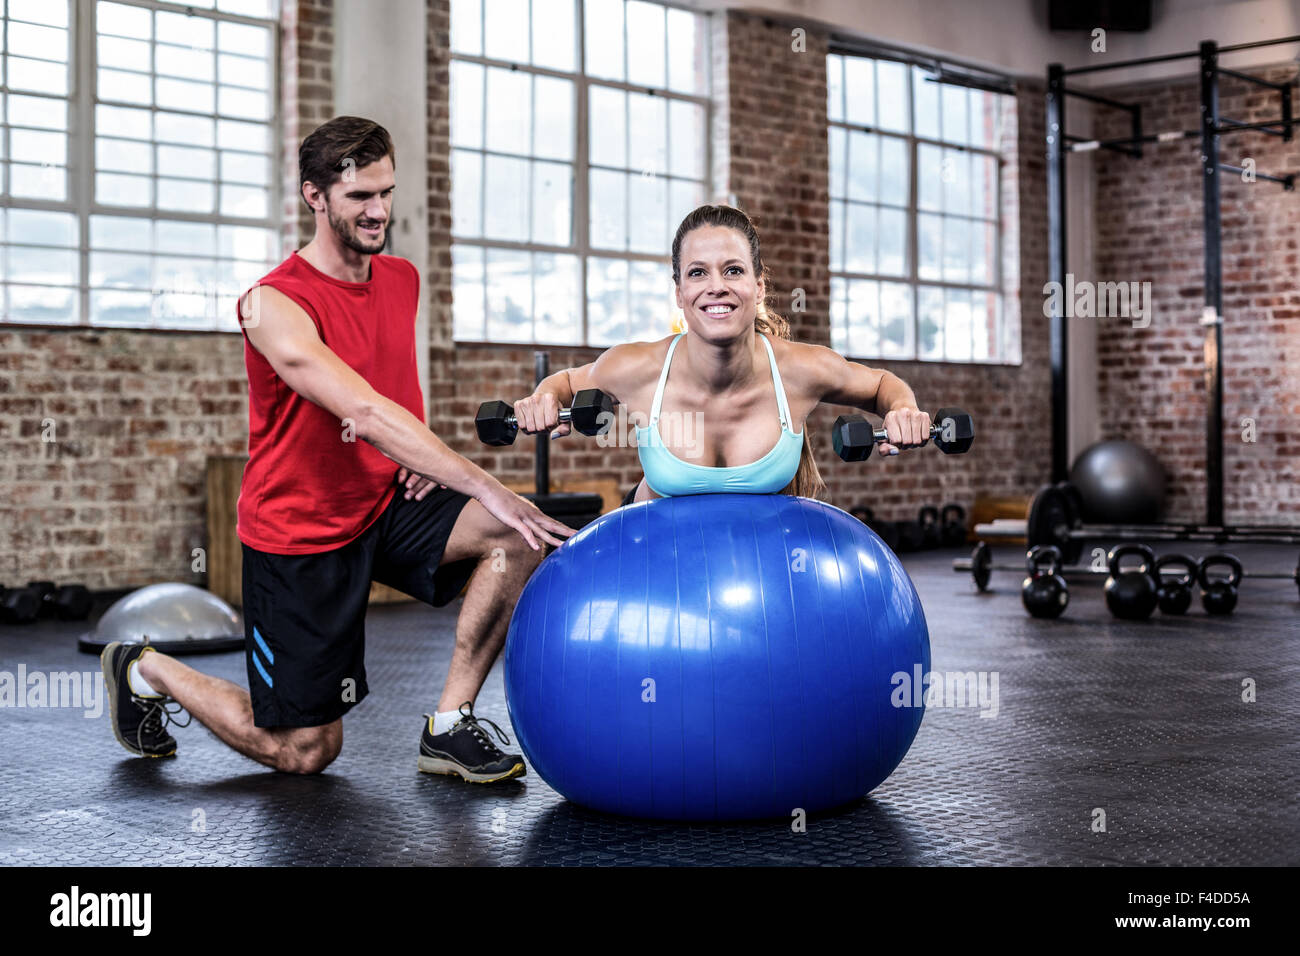 Personal trainer with client lifting dumbbells on exercise ball Stock Photo